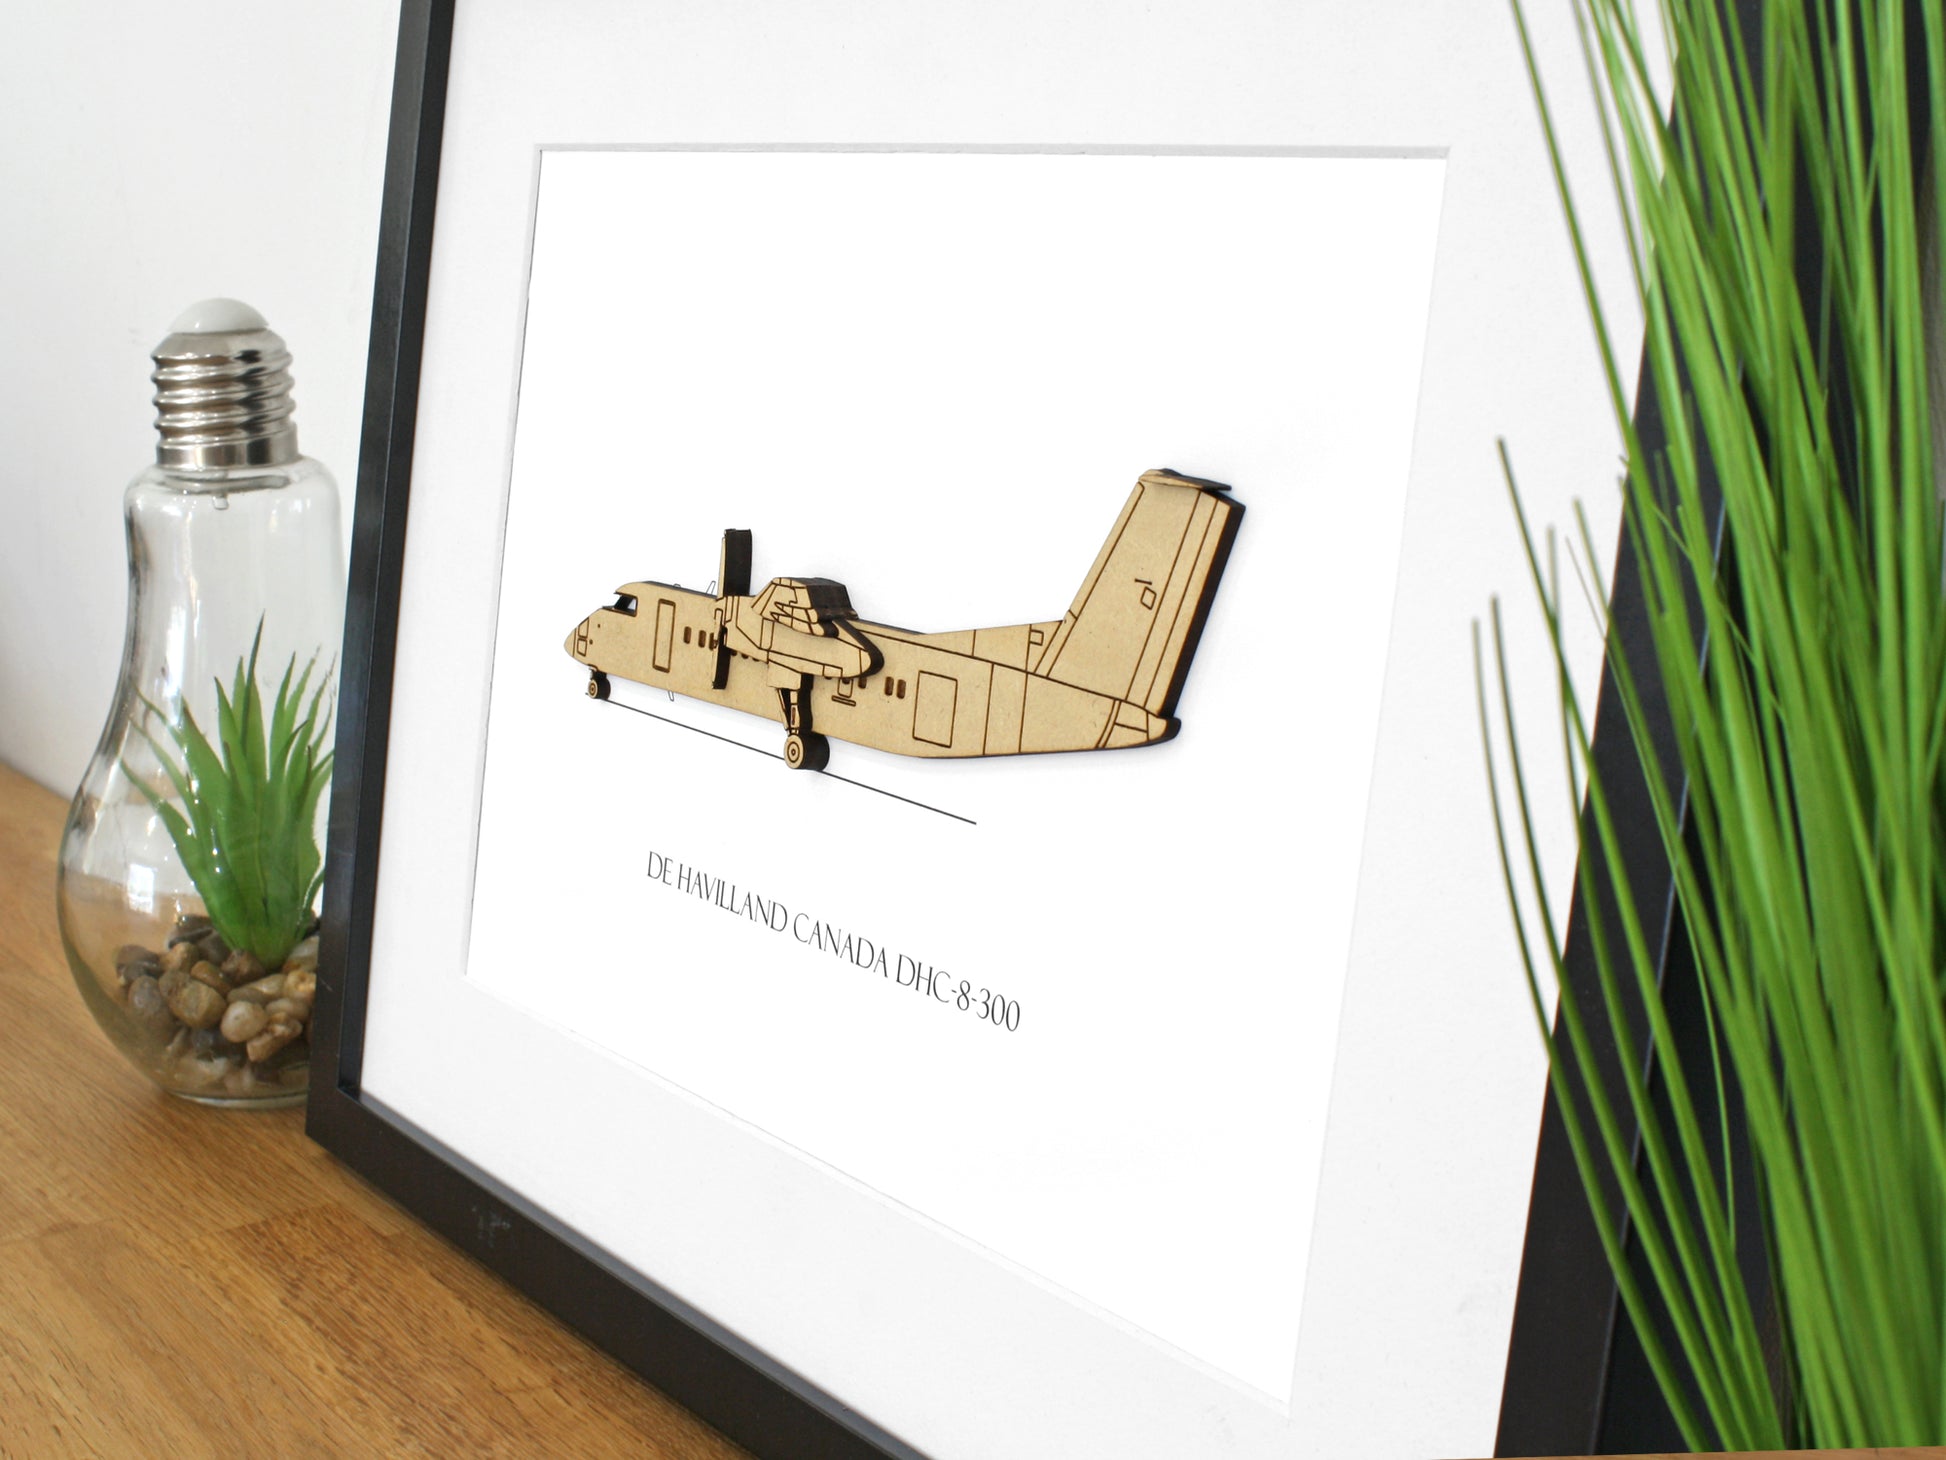 DHC-8-300 aviation gifts